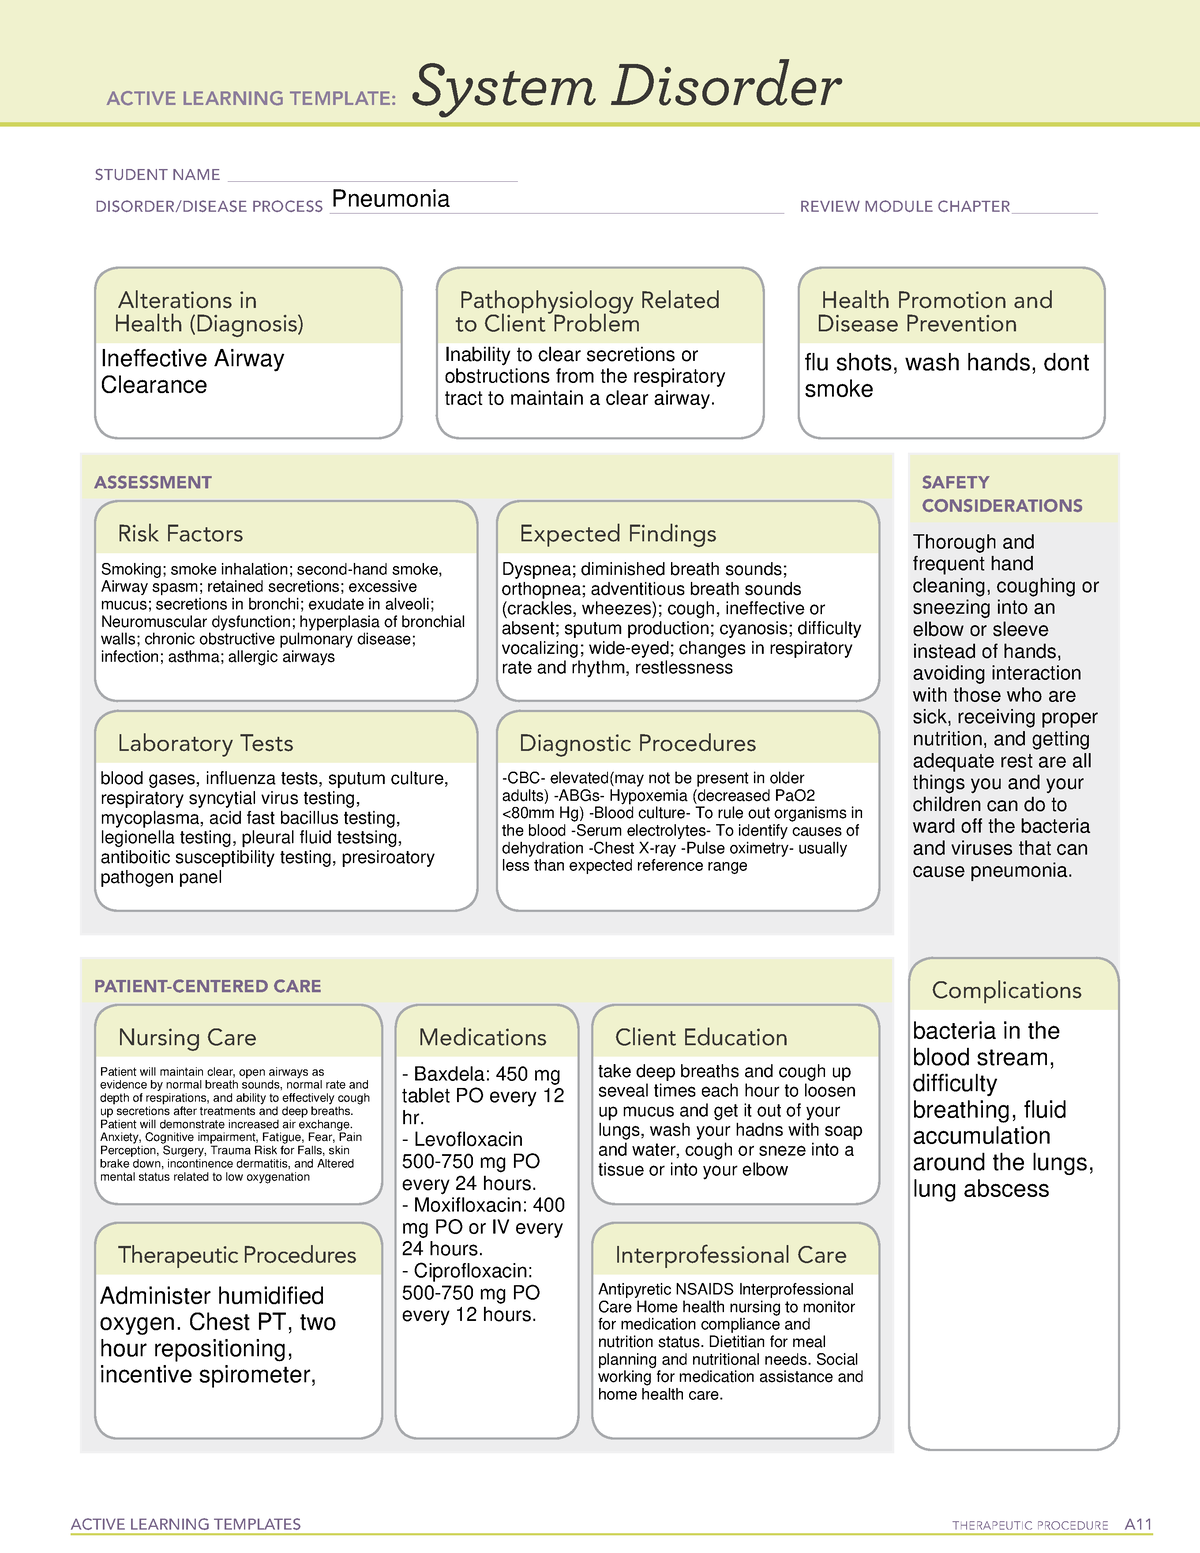 pneumonia-system-disorder-template-active-learning-templates